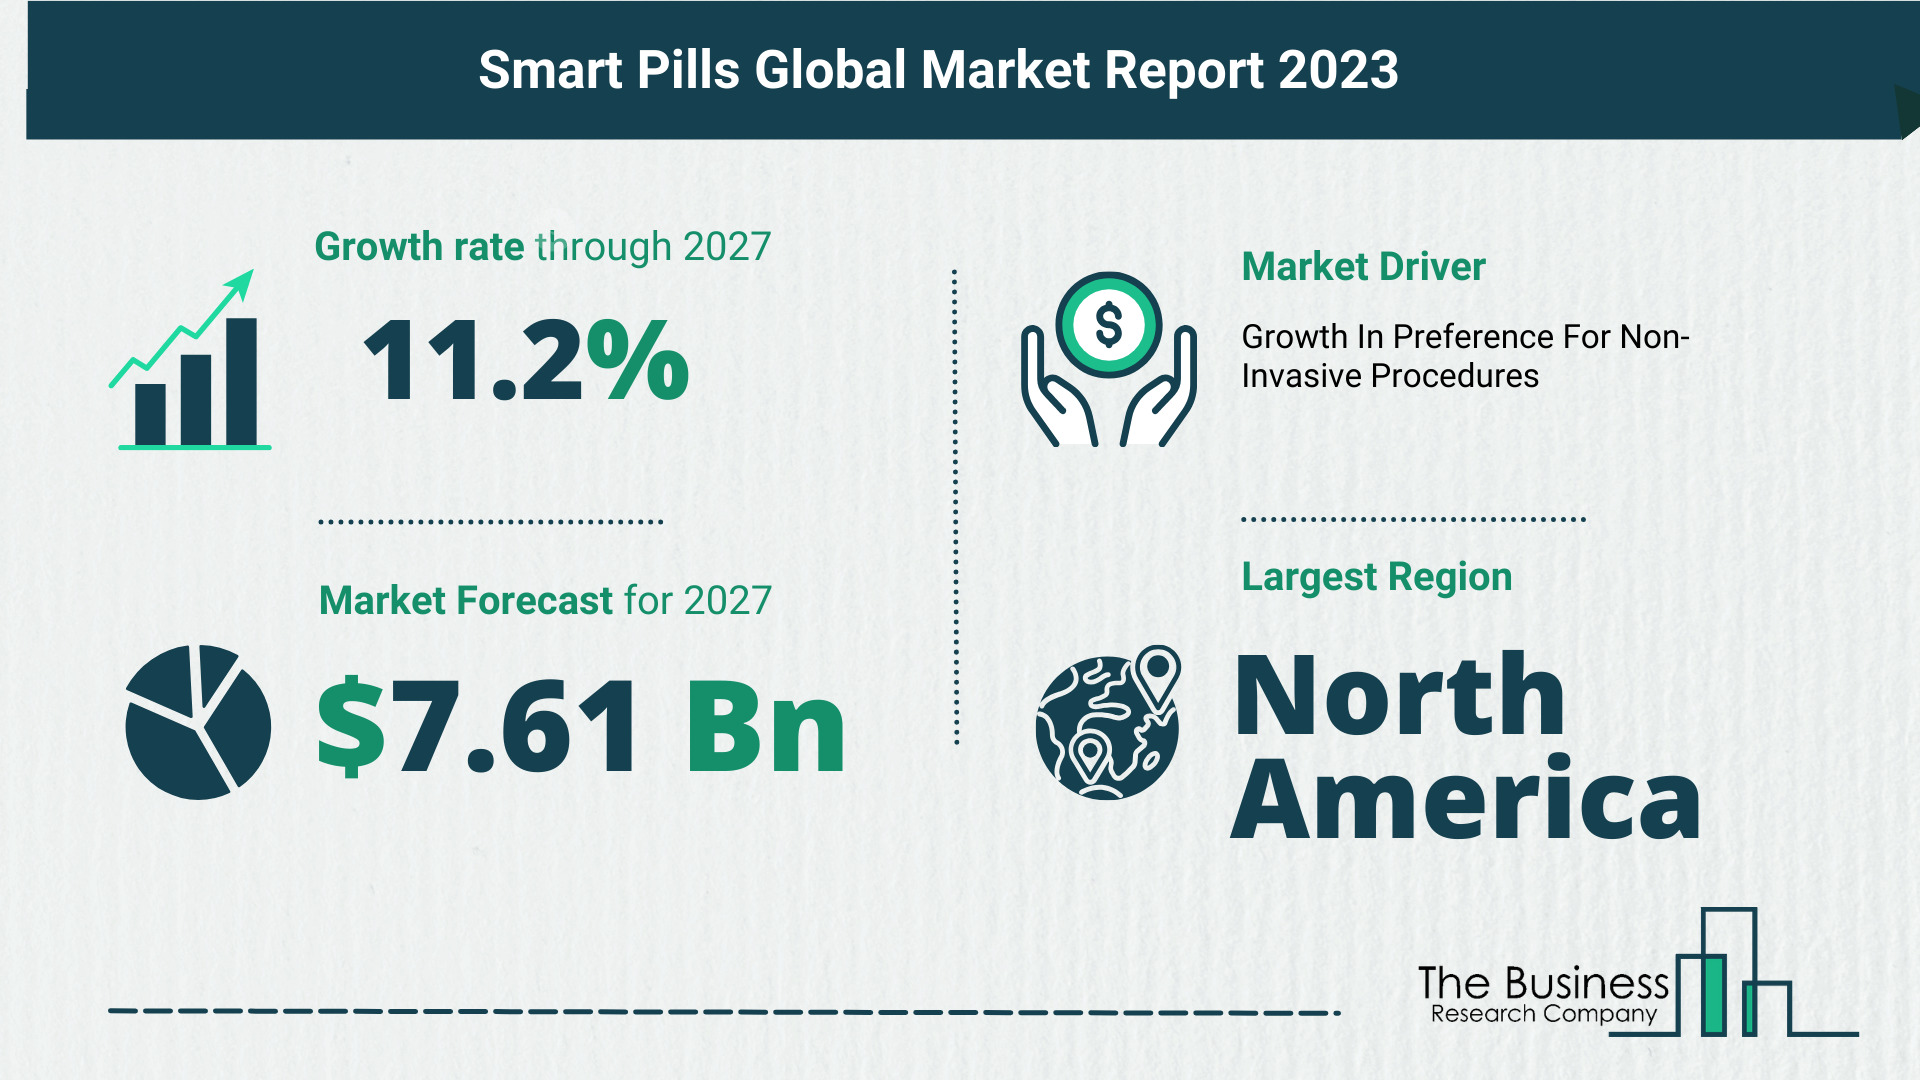 Top 5 Insights From The Smart Pills Market Report 2023